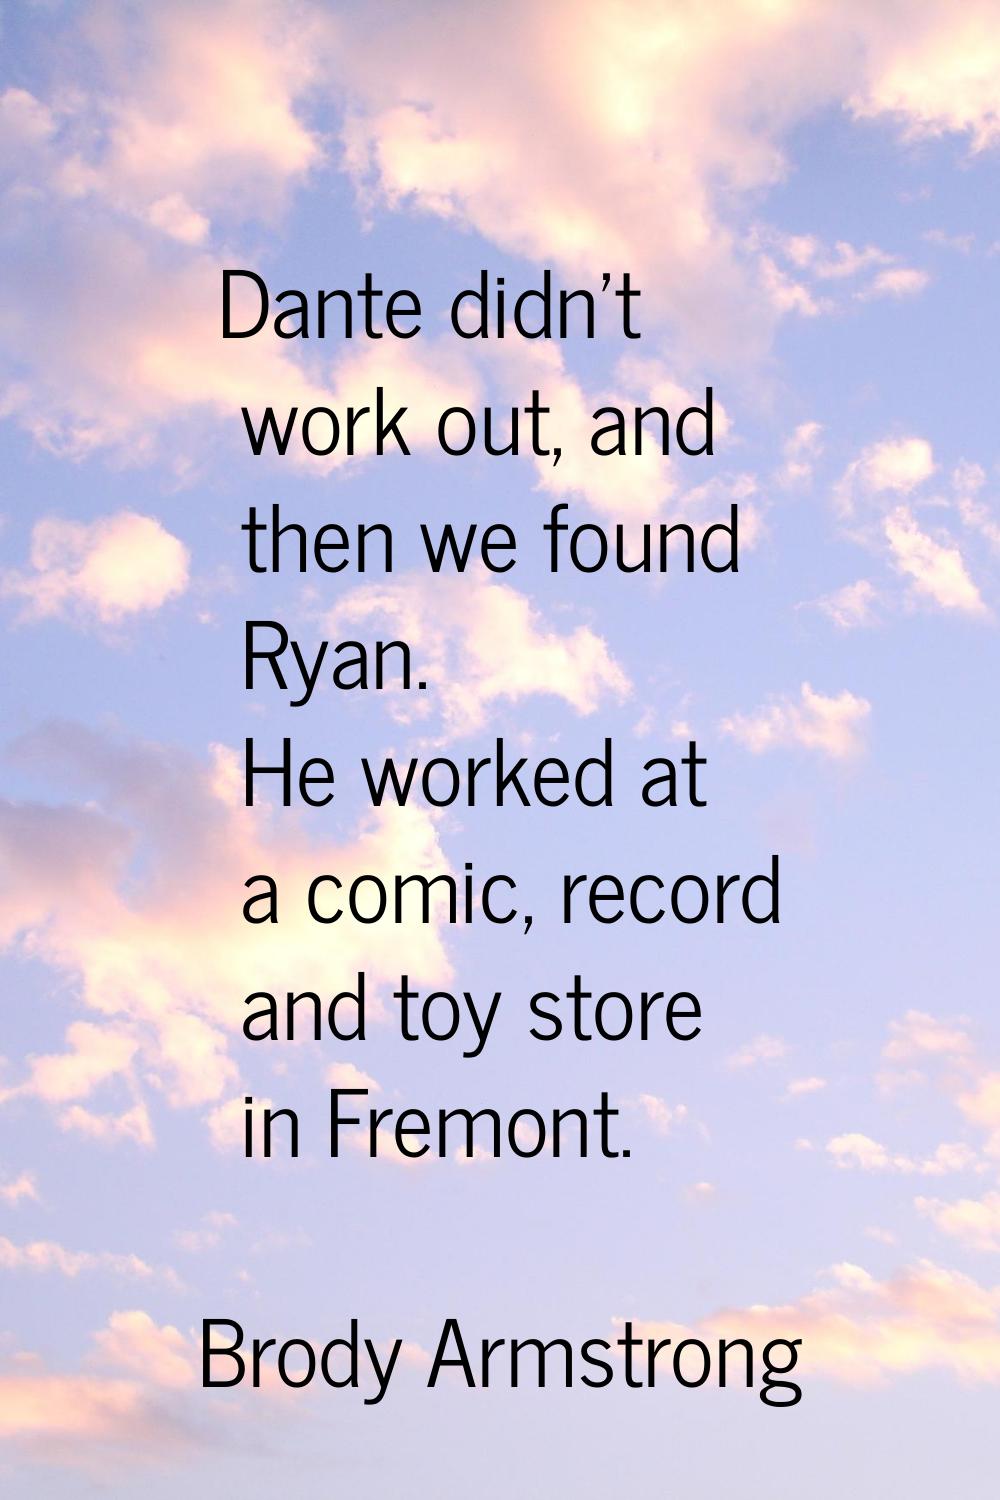 Dante didn't work out, and then we found Ryan. He worked at a comic, record and toy store in Fremon